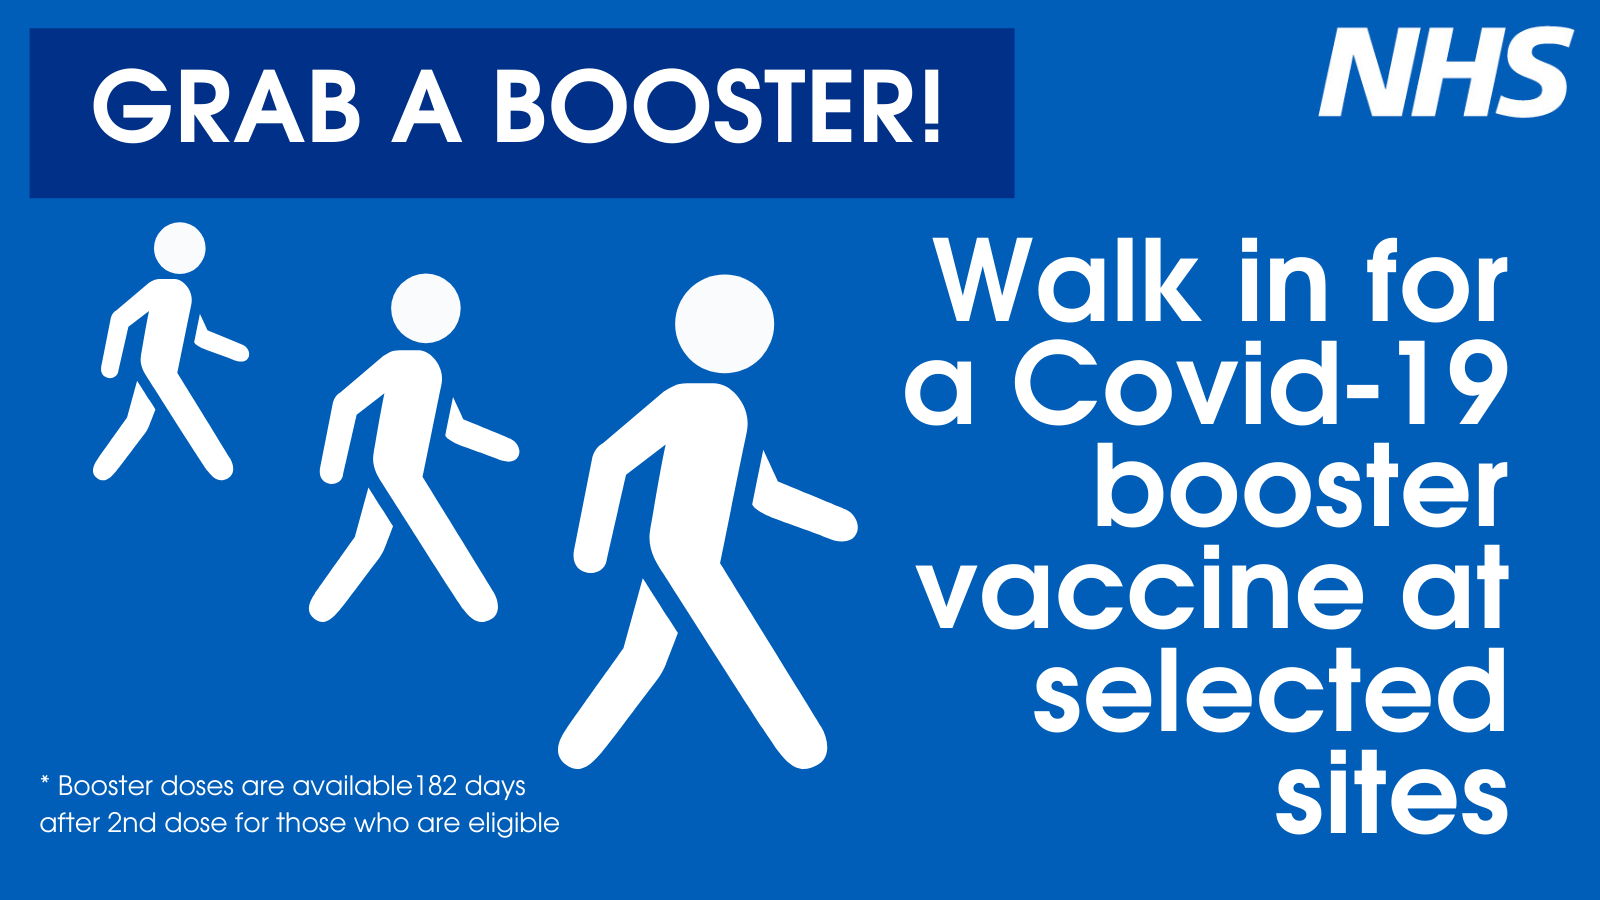 Post booster vaccine